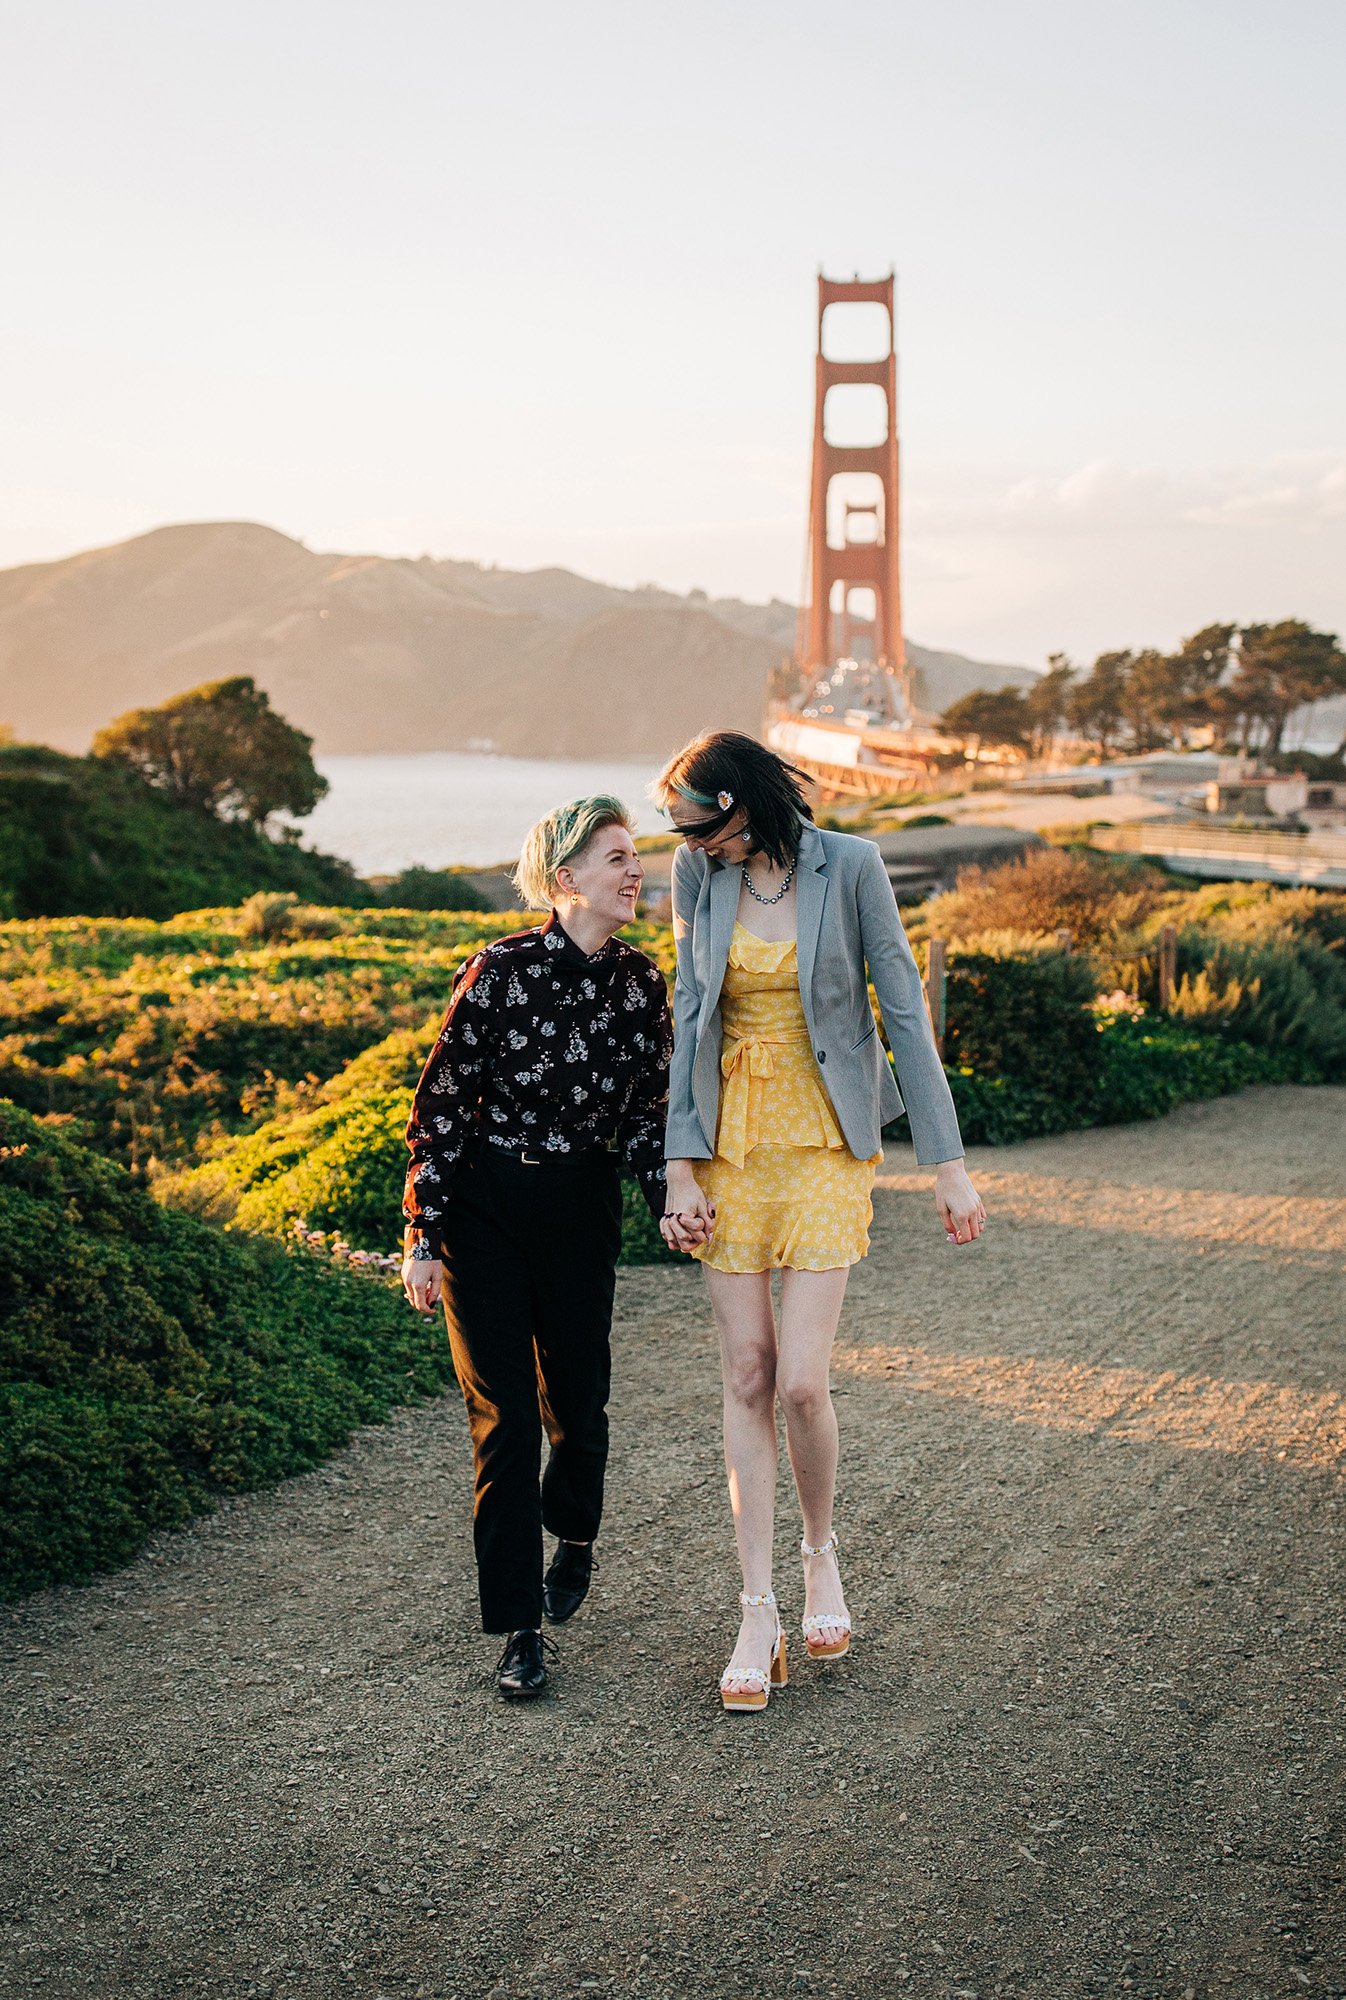 An and Sam walk together in front of the Golden Gate Bridge in San Francisco.